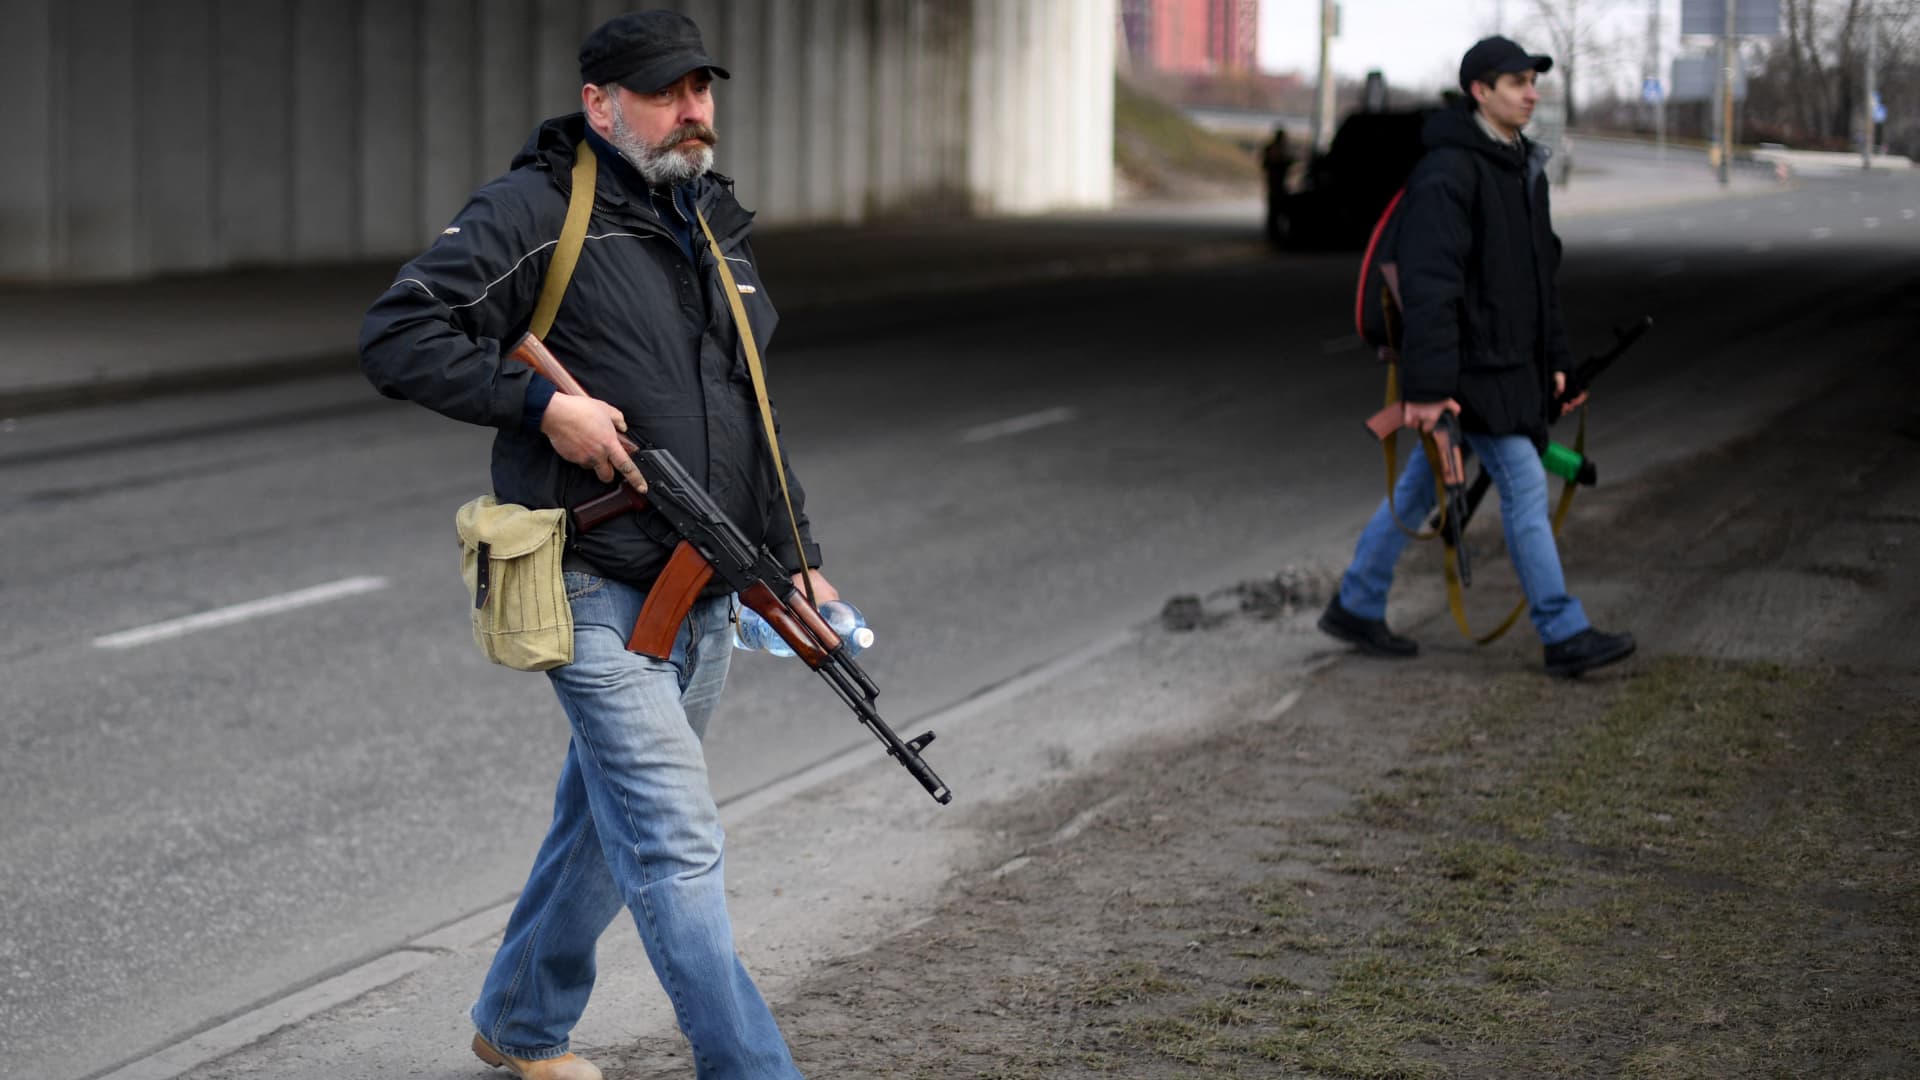 Volunteers, one holding an AK-47 rifle, protect a main road leading into Kyiv on February 25, 2022.